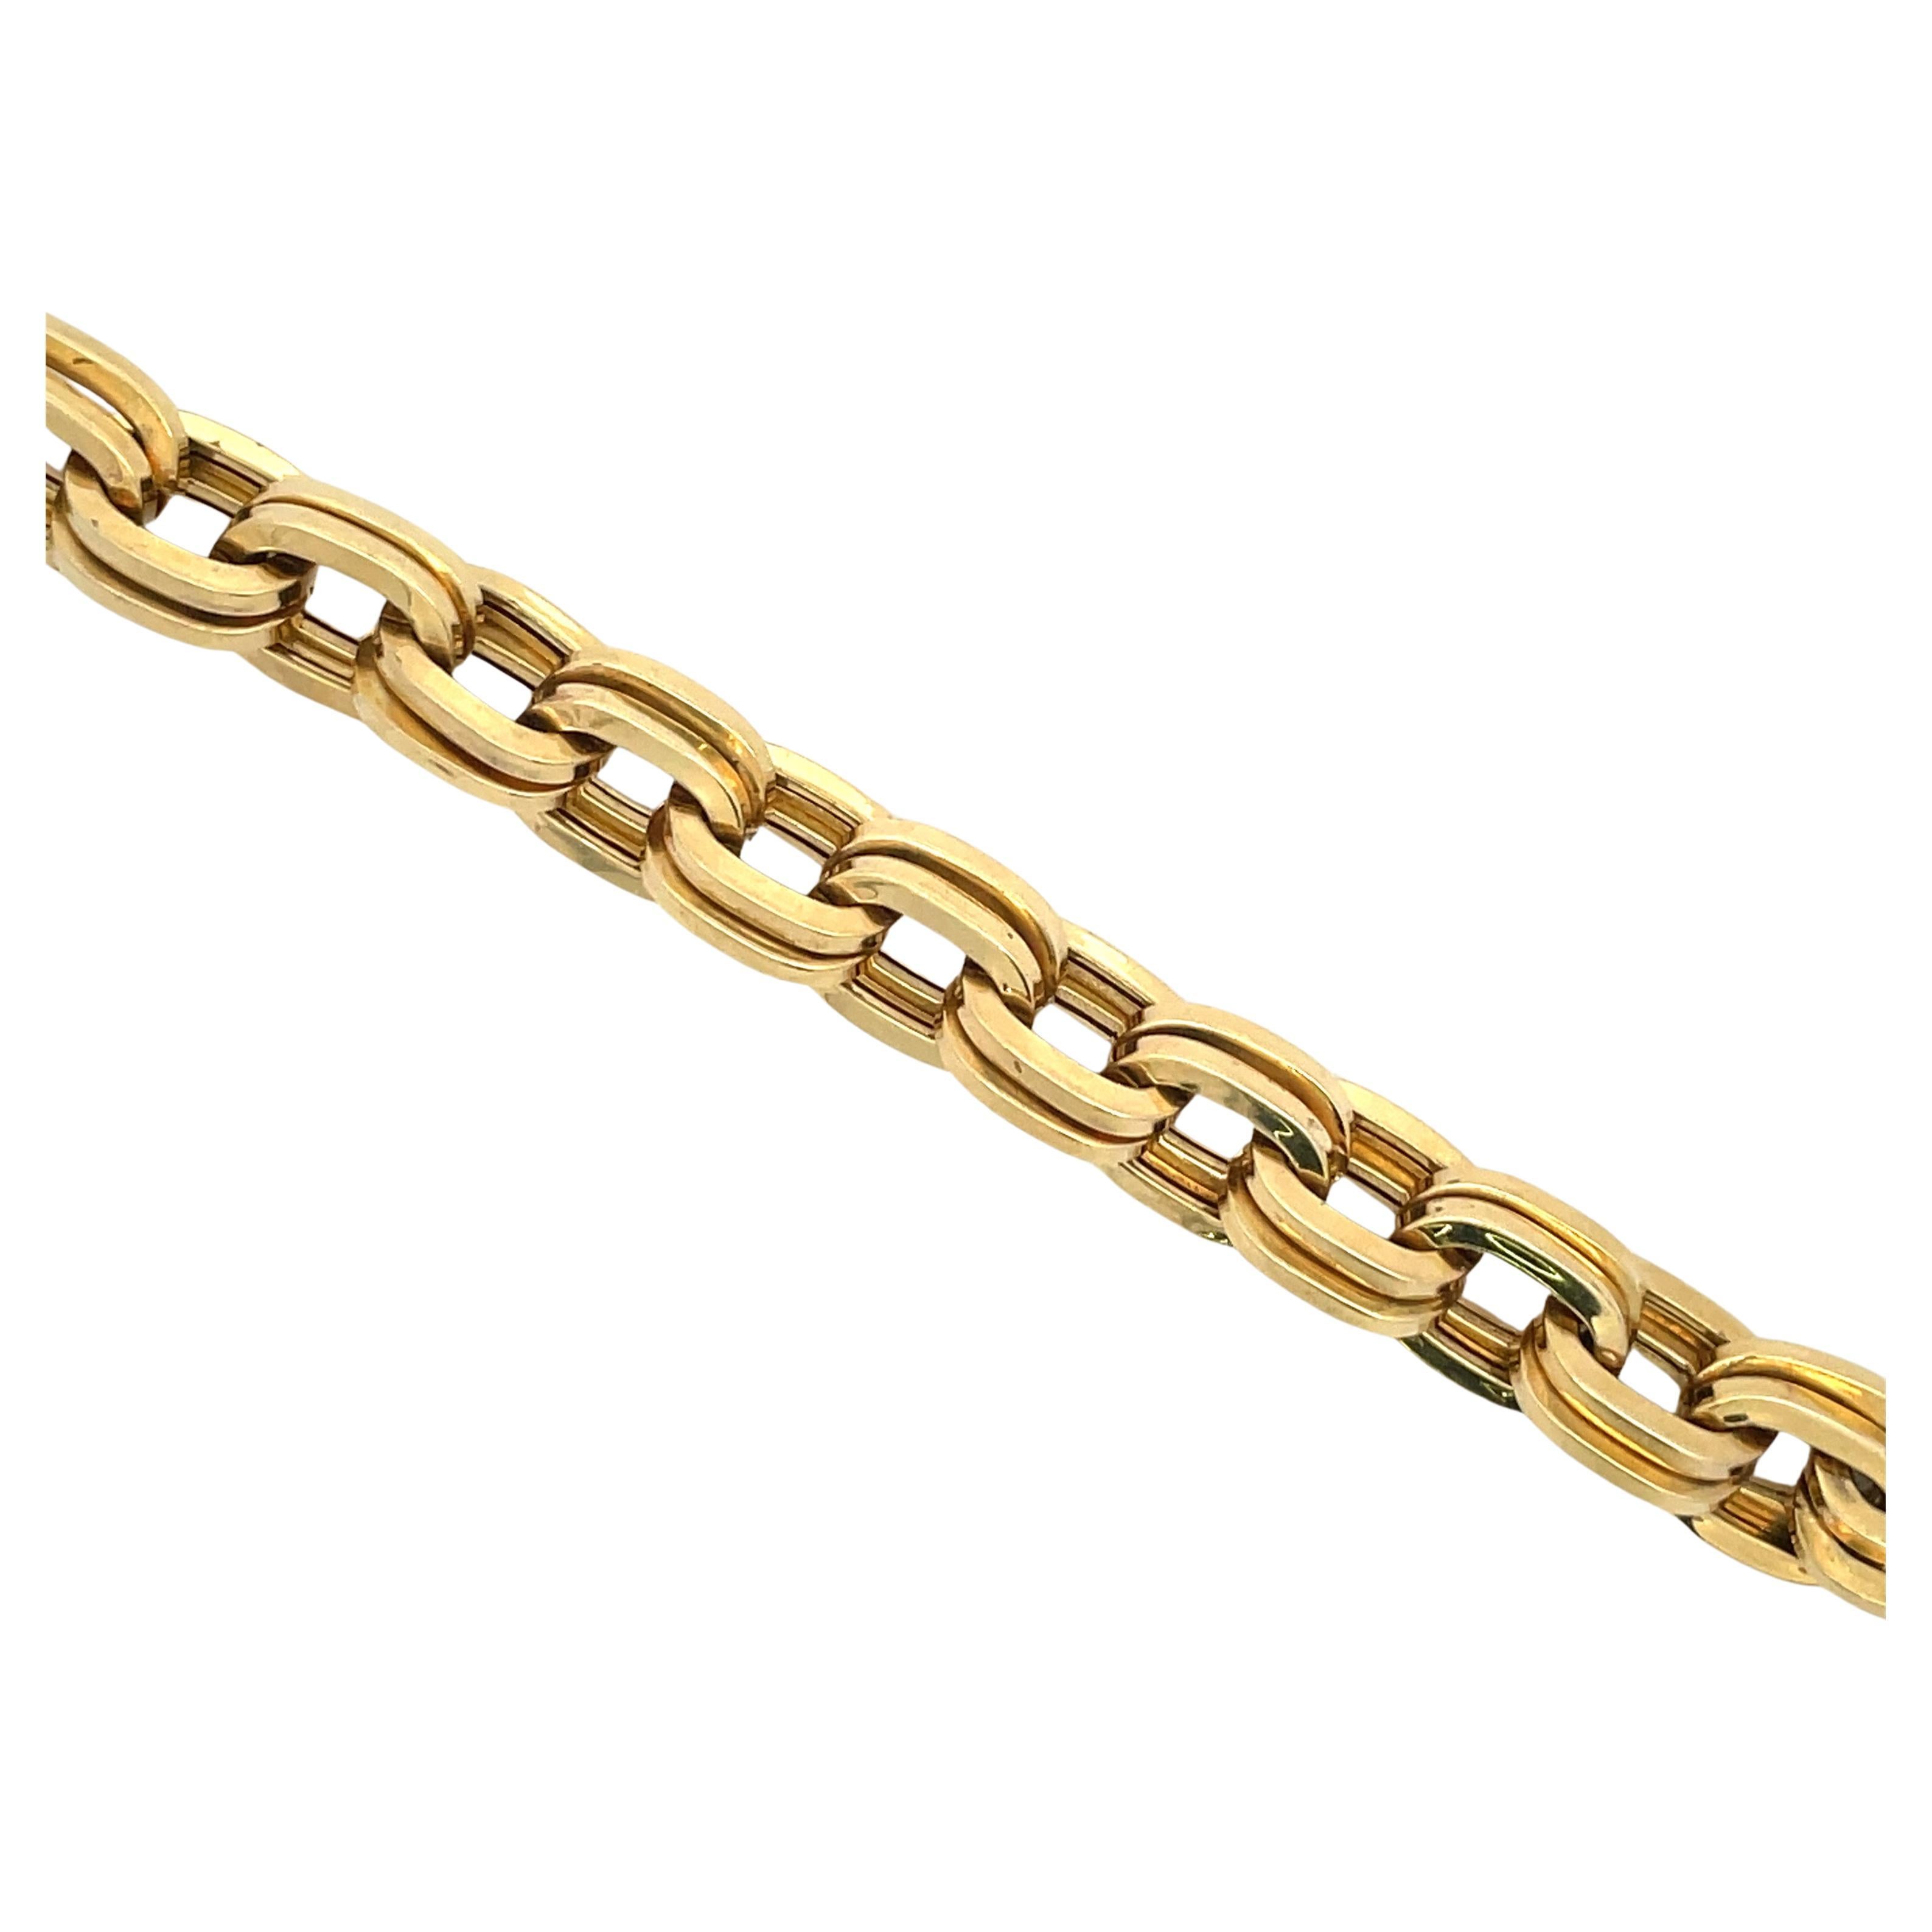 Made in Italy, this bracelet features 21 double square links weighing 22.8 grams.
Stamped Italy 14k AND
More link bracelets available
Search Harbor Diamonds